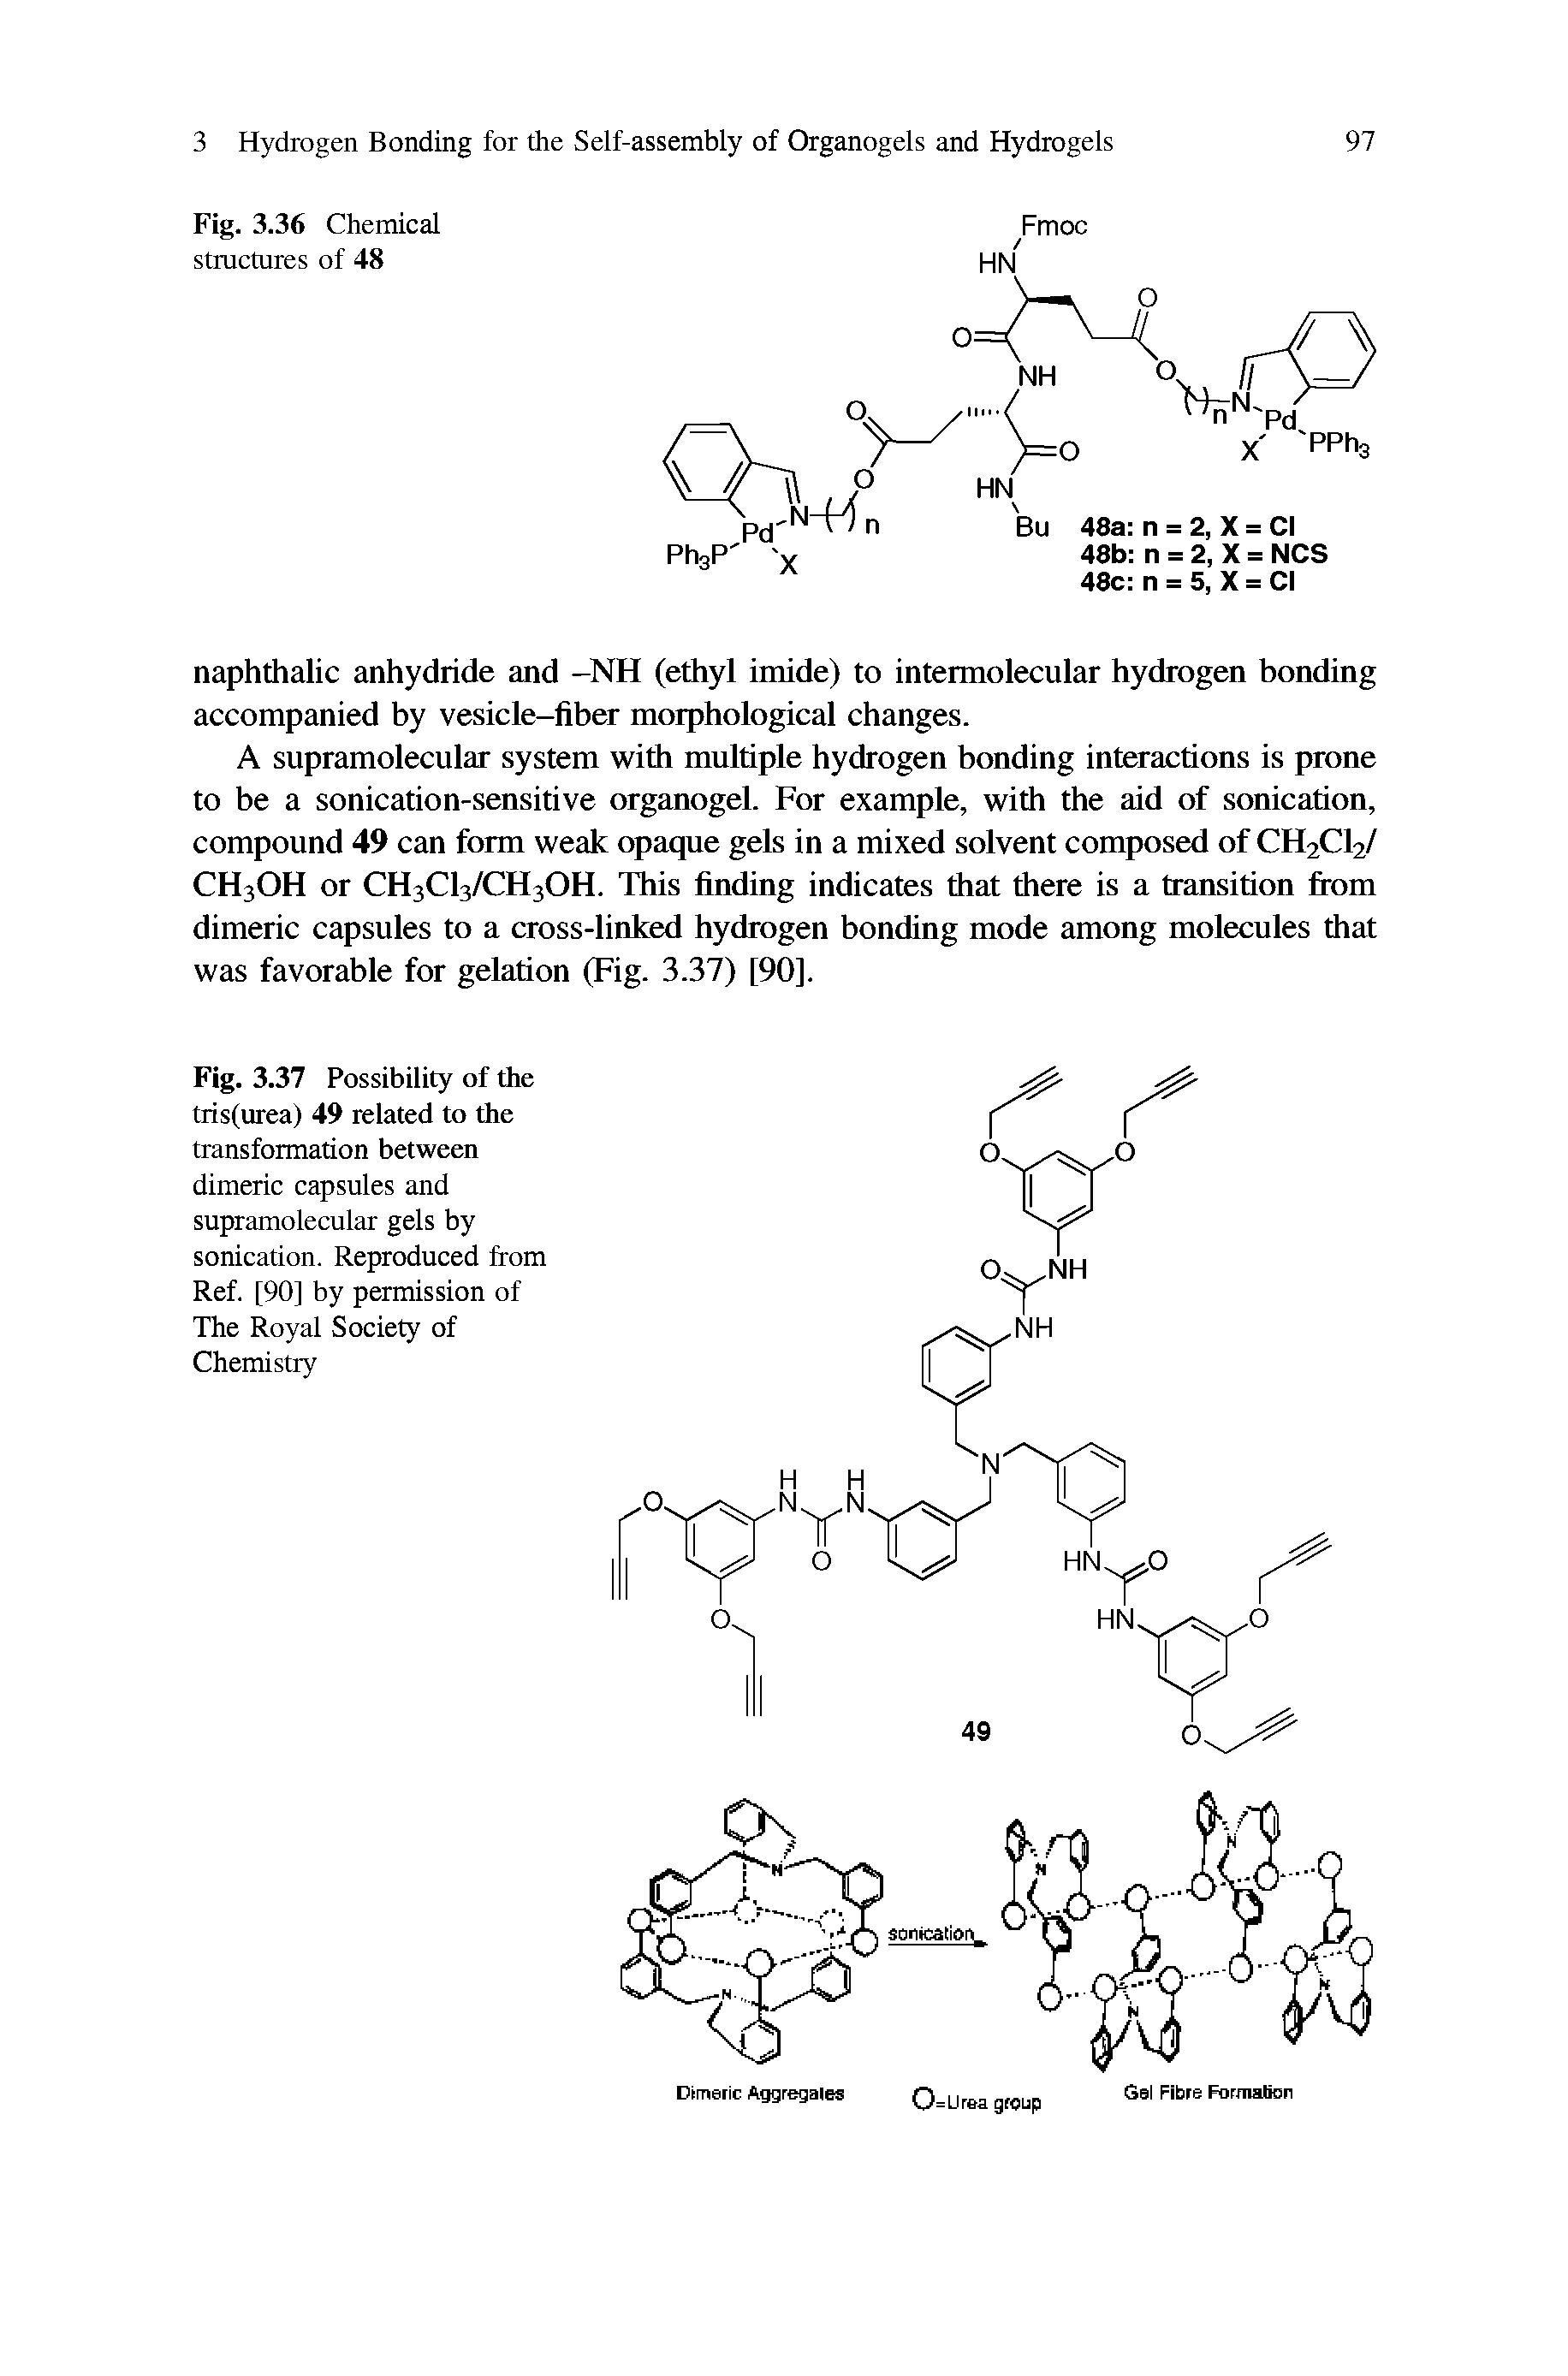 Fig. 3.37 Possibility of the tris(urea) 49 related to the transformation between dimeric capsules and supramolecular gels by sonication. Reproduced from Ref. [90] by permission of The Royal Society of Chemistry...